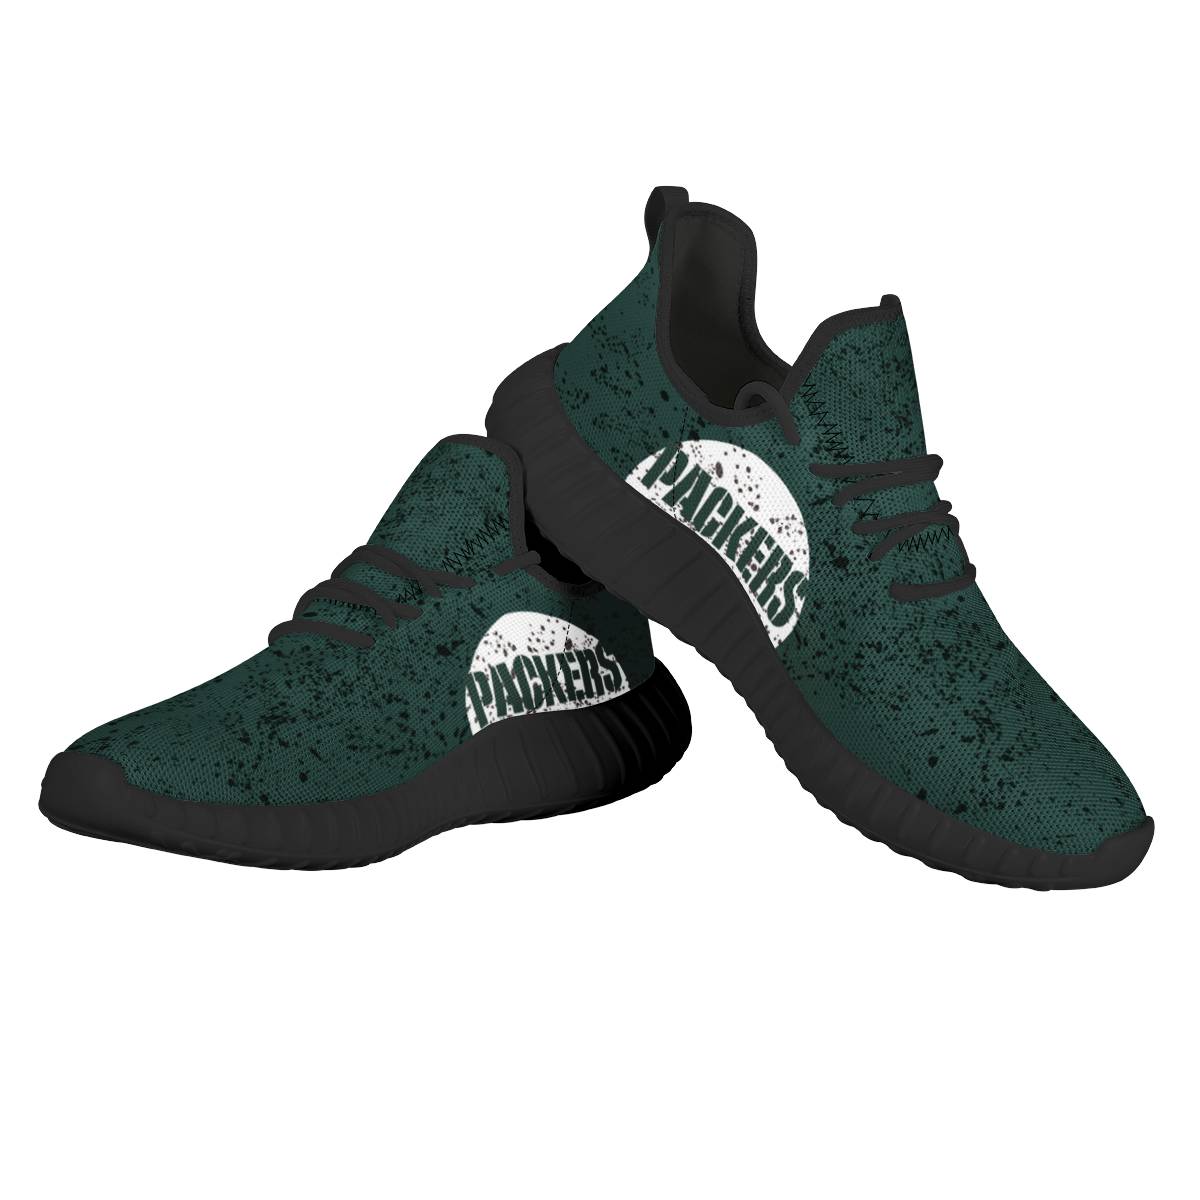 Men's Green Bay Packers Mesh Knit Sneakers/Shoes 002